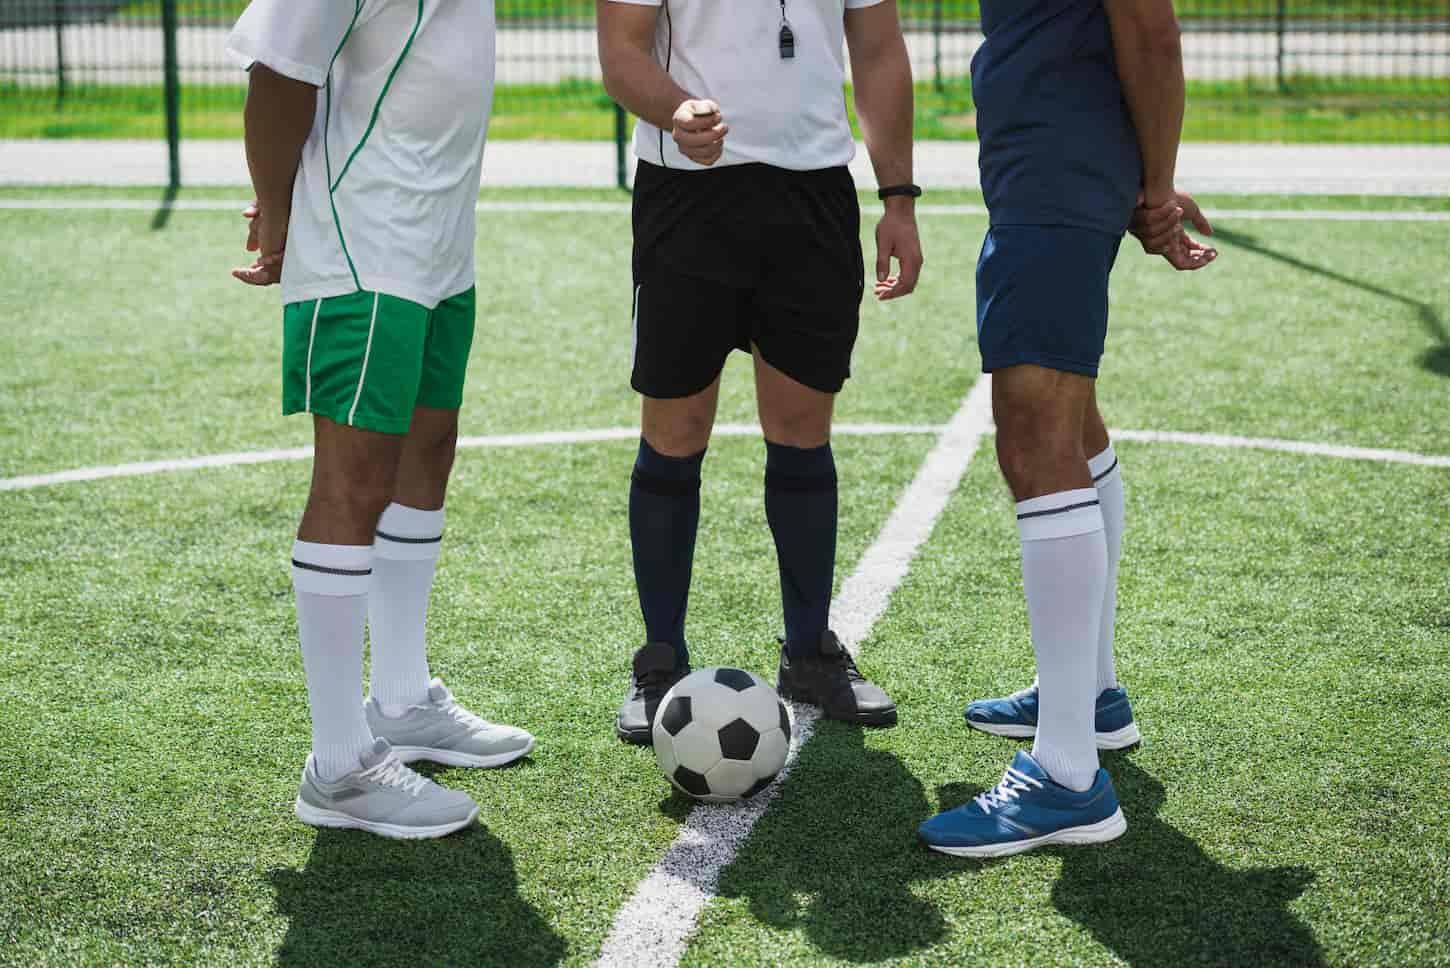 An image of a referee and soccer players on a soccer pitch starting game.